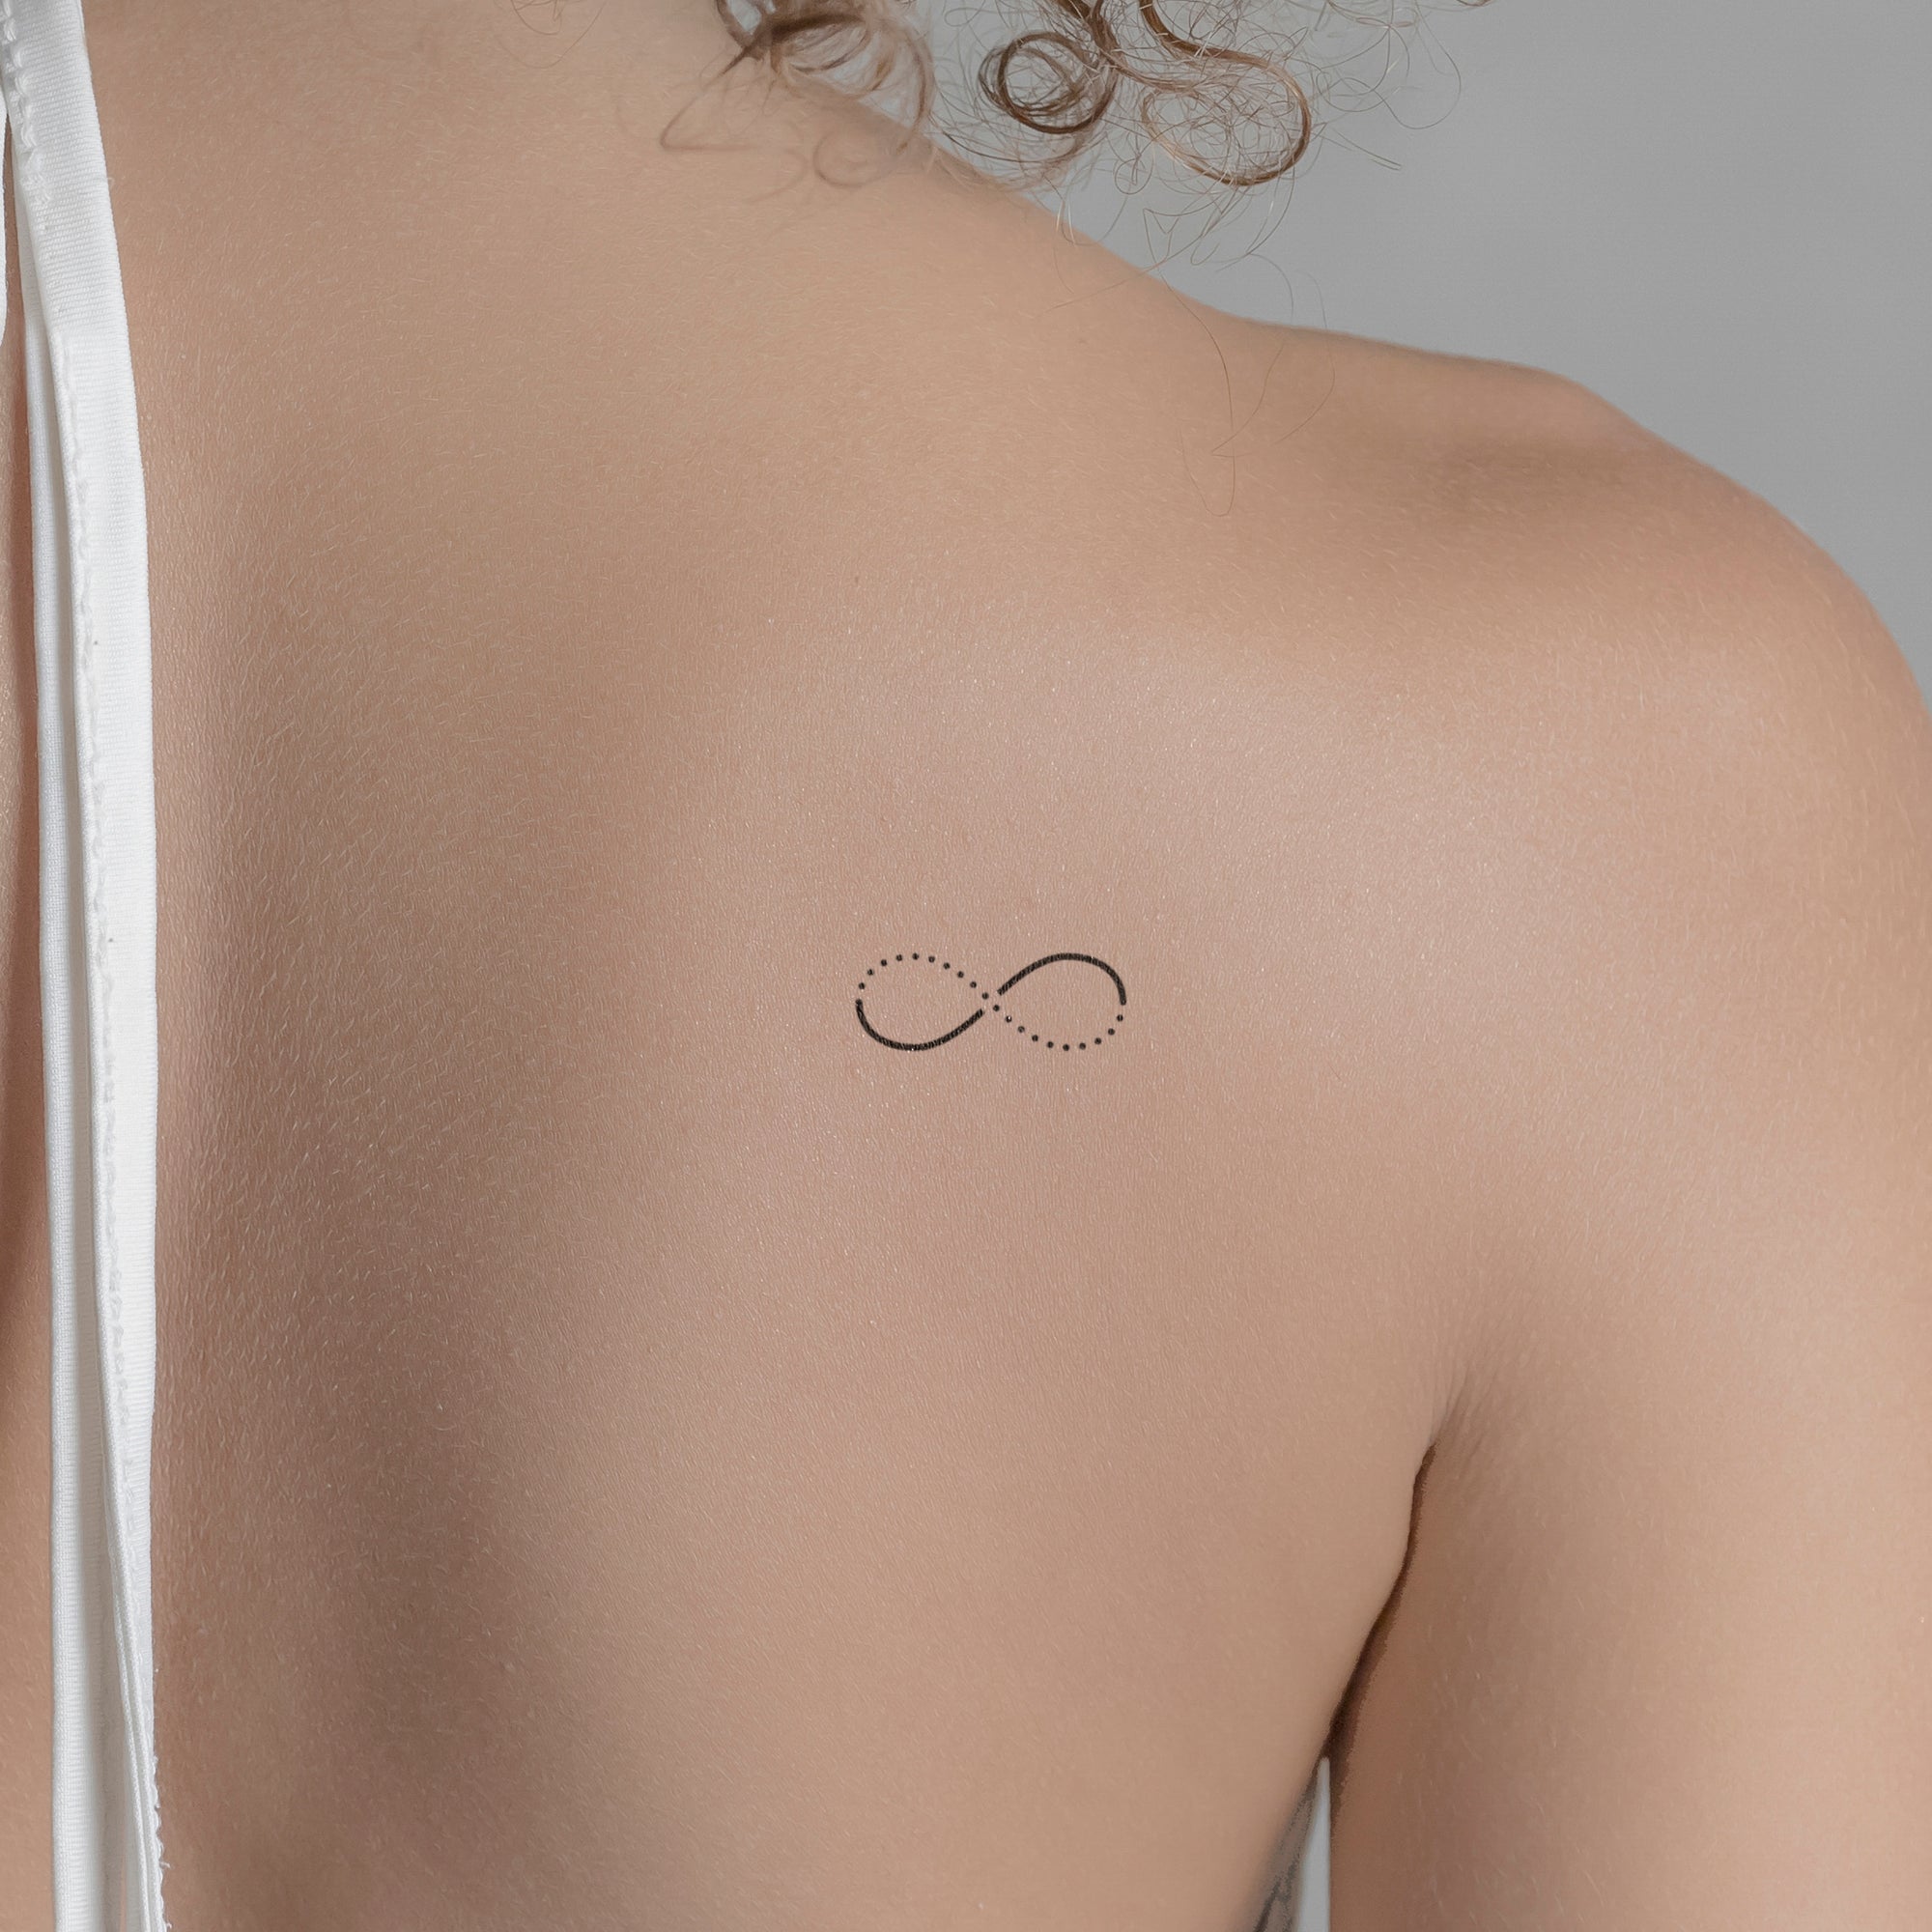 The Sims Resource - Infinity neck tattoo